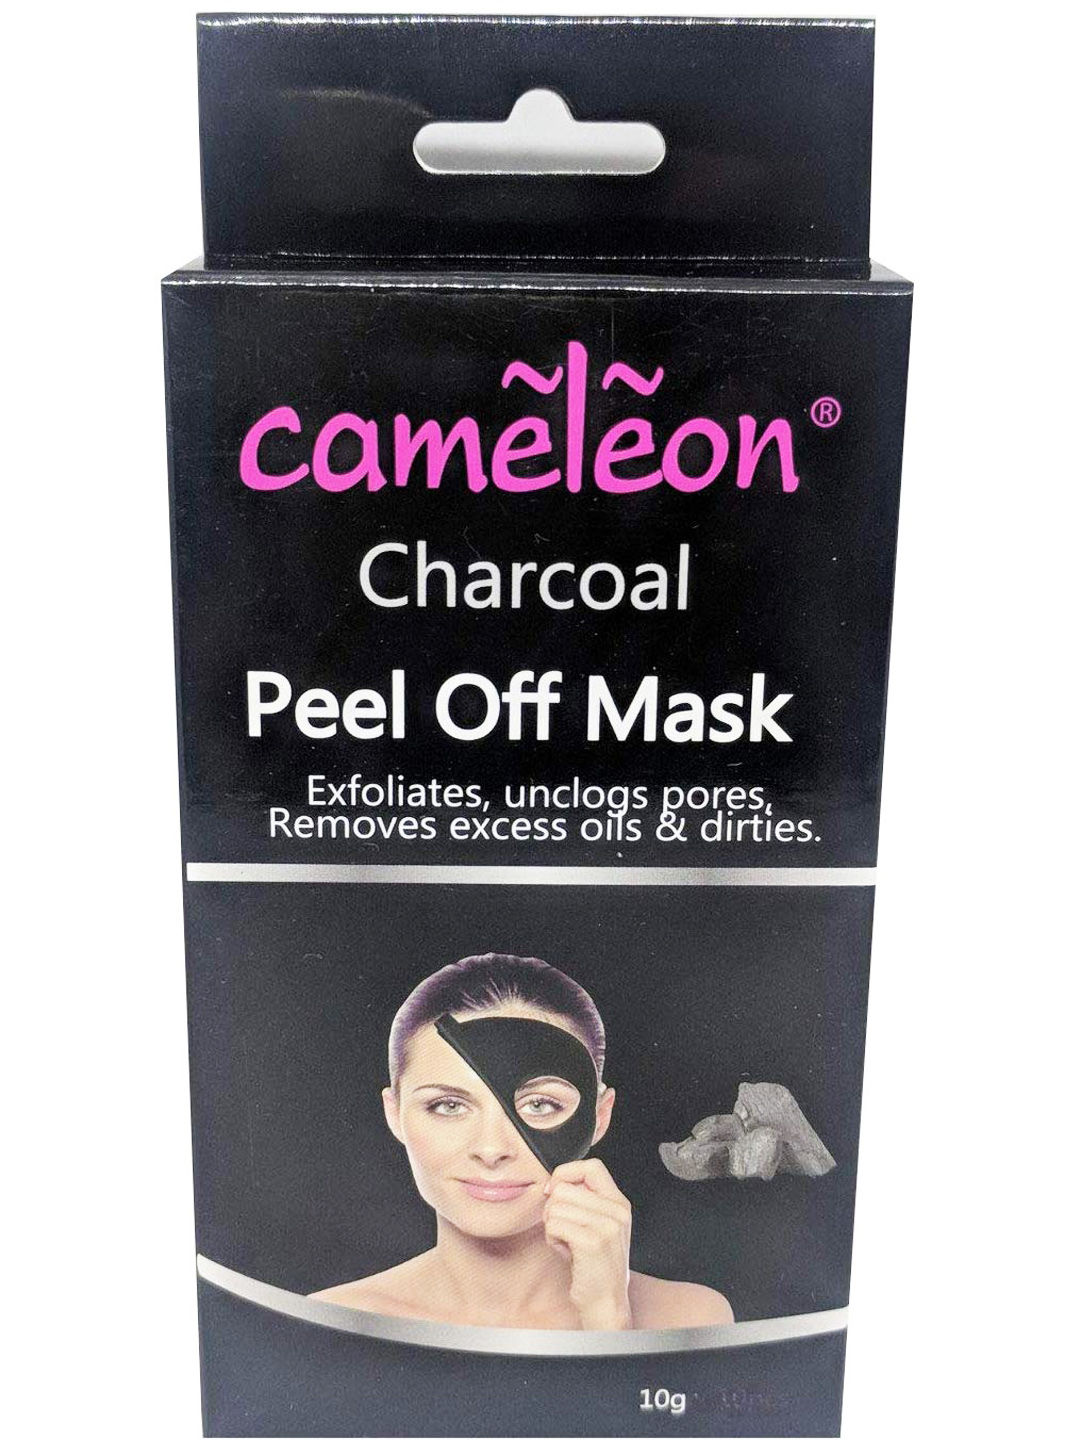 Buy Cameleon Charcoal Peel Off Mask (6 pouch) - Purplle